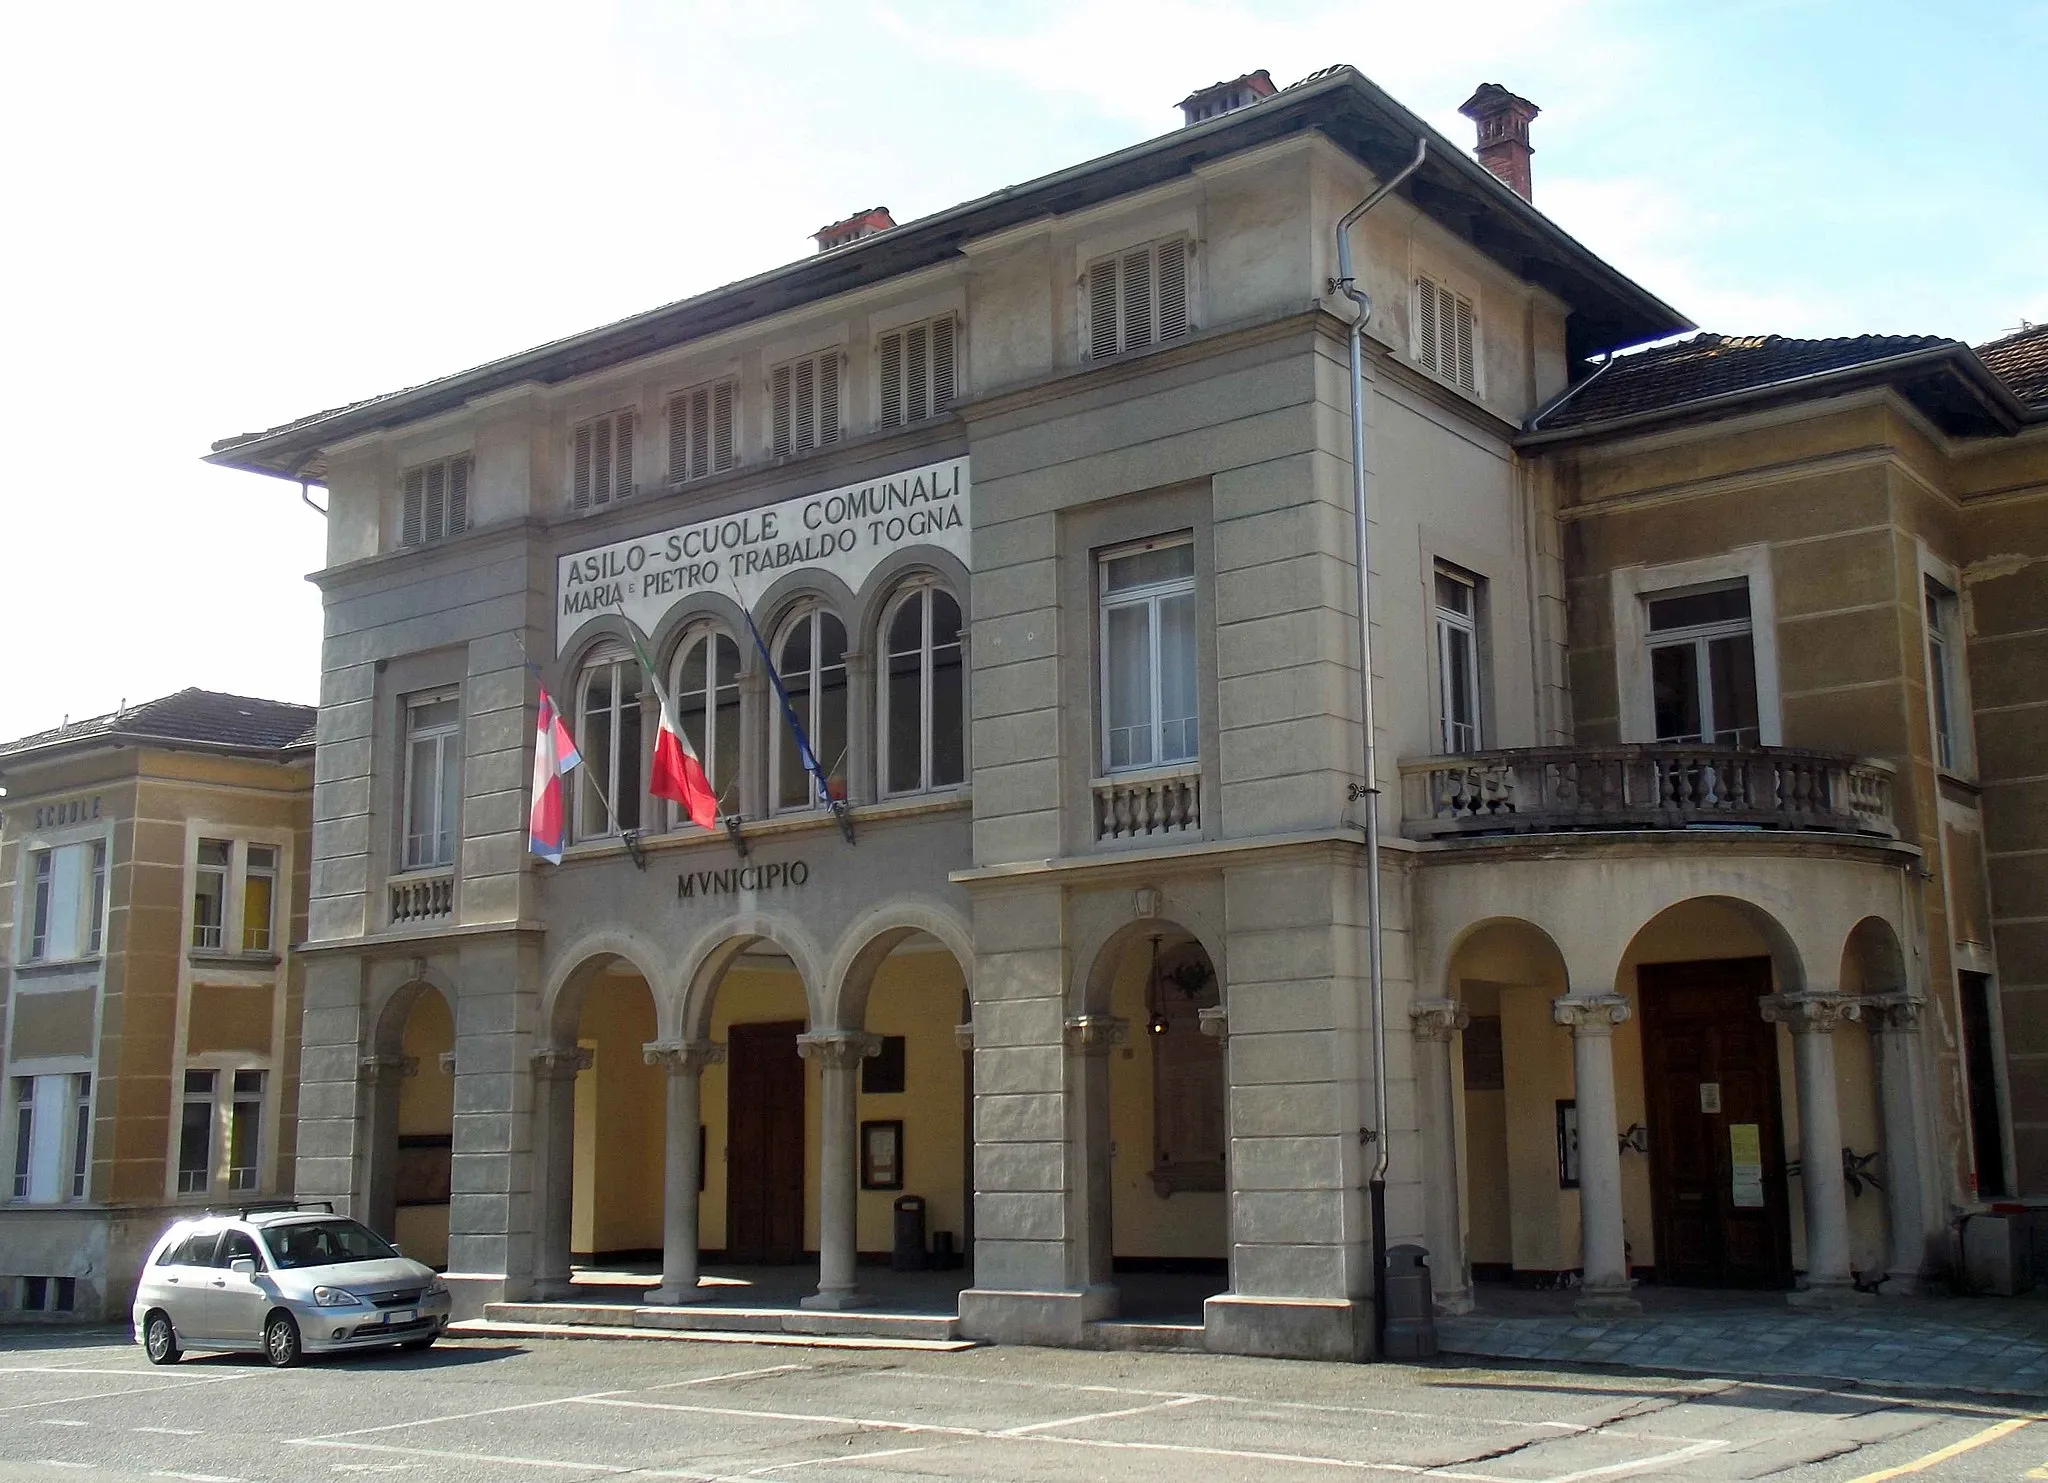 Photo showing: Pray (BI, Italy): town hall and school